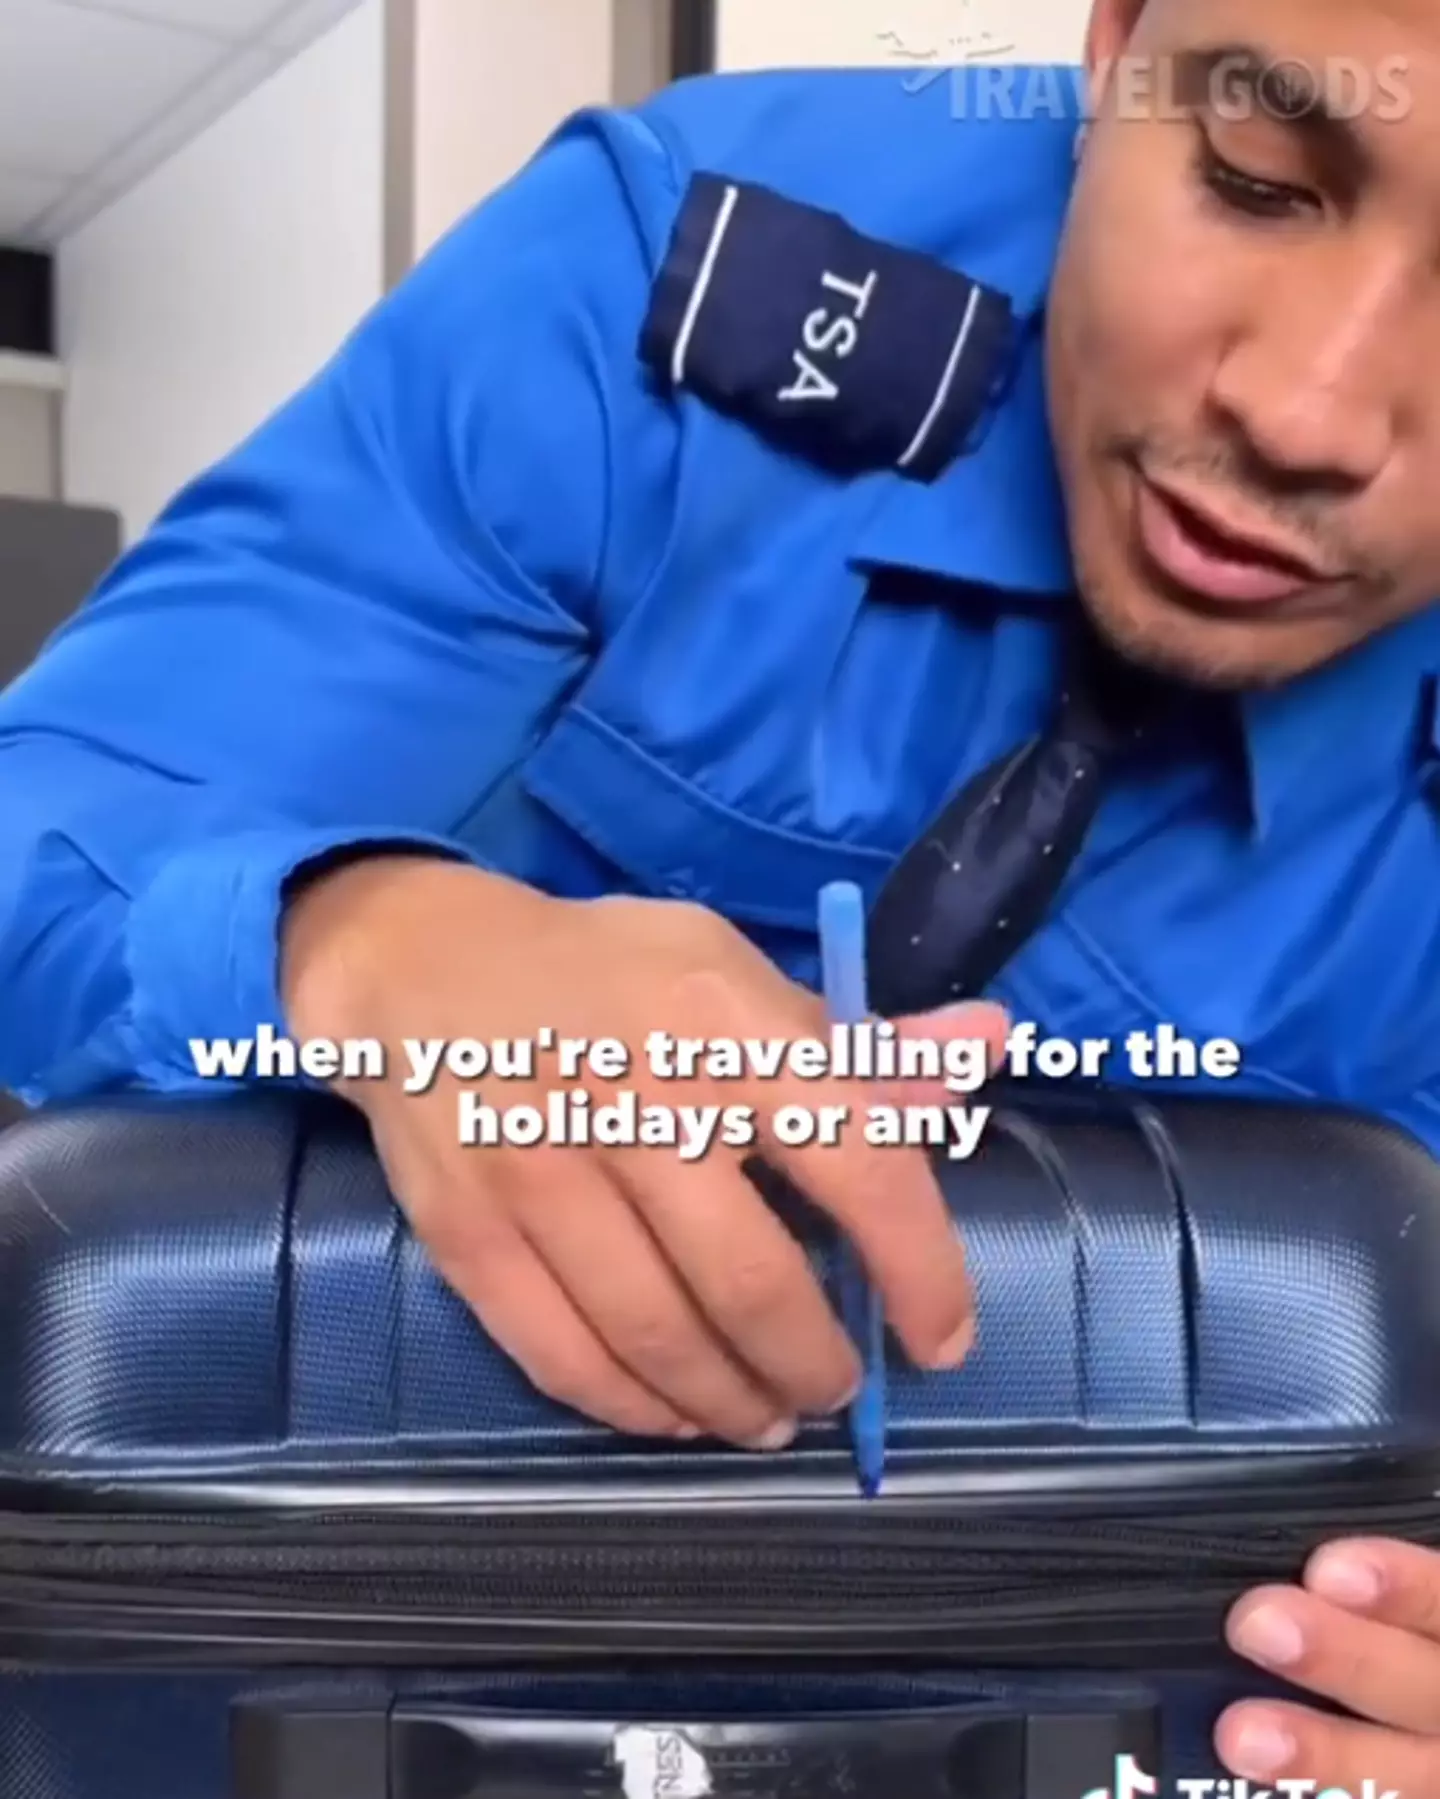 The airport worker showed how easy it was to get into the luggage with just a pen.